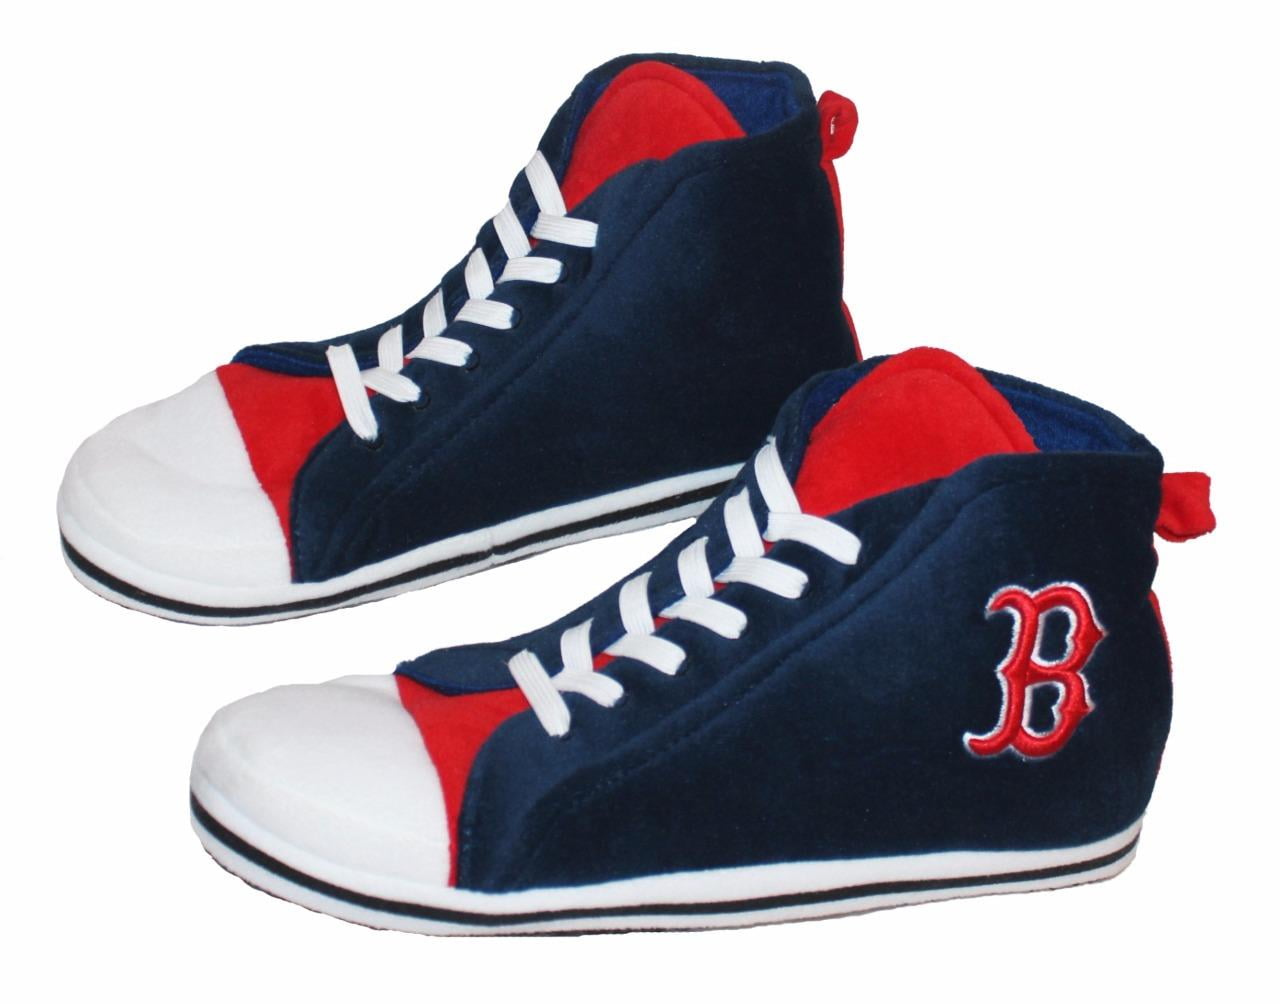 red sox slippers